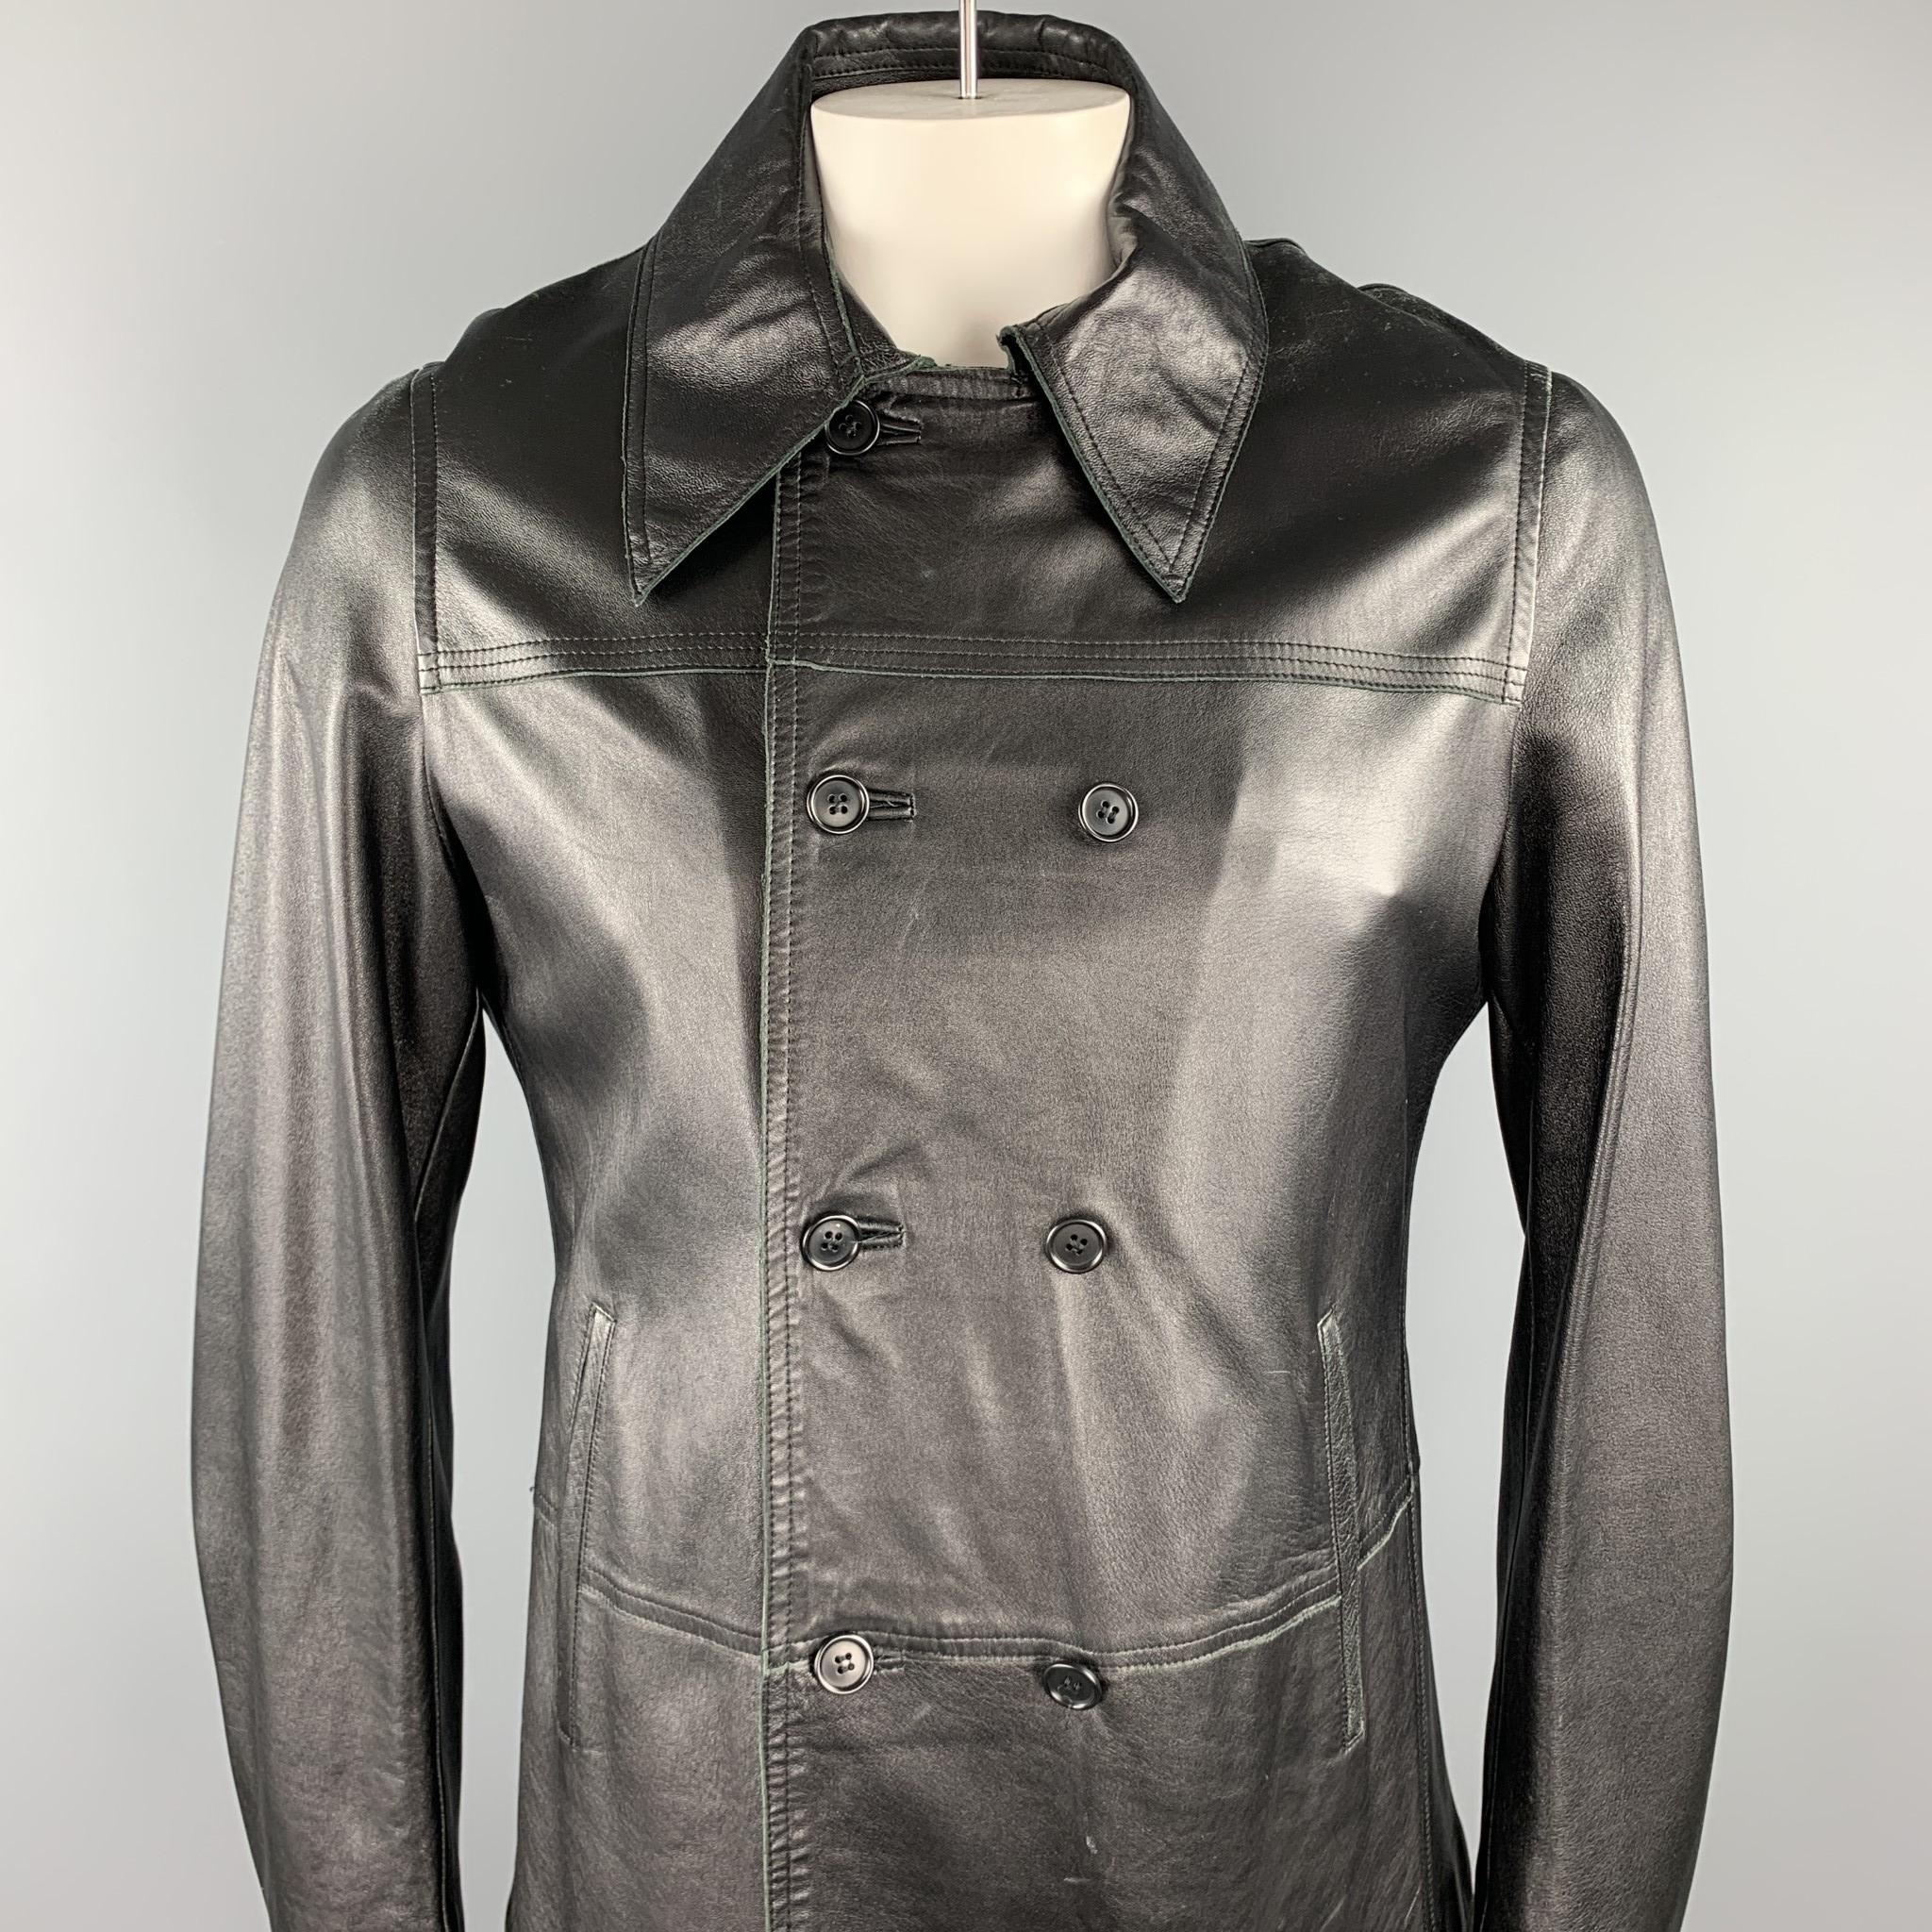 CoSTUME HOMME jacket comes in a black leather wit a quilted liner featuring slit pockets, pointed collar, and a double breasted closure.

Very Good Pre-Owned Condition.
Marked: 50

Measurements:

Shoulder: 17.5 in. 
Chest: 44 in. 
Sleeve: 28.5 in.